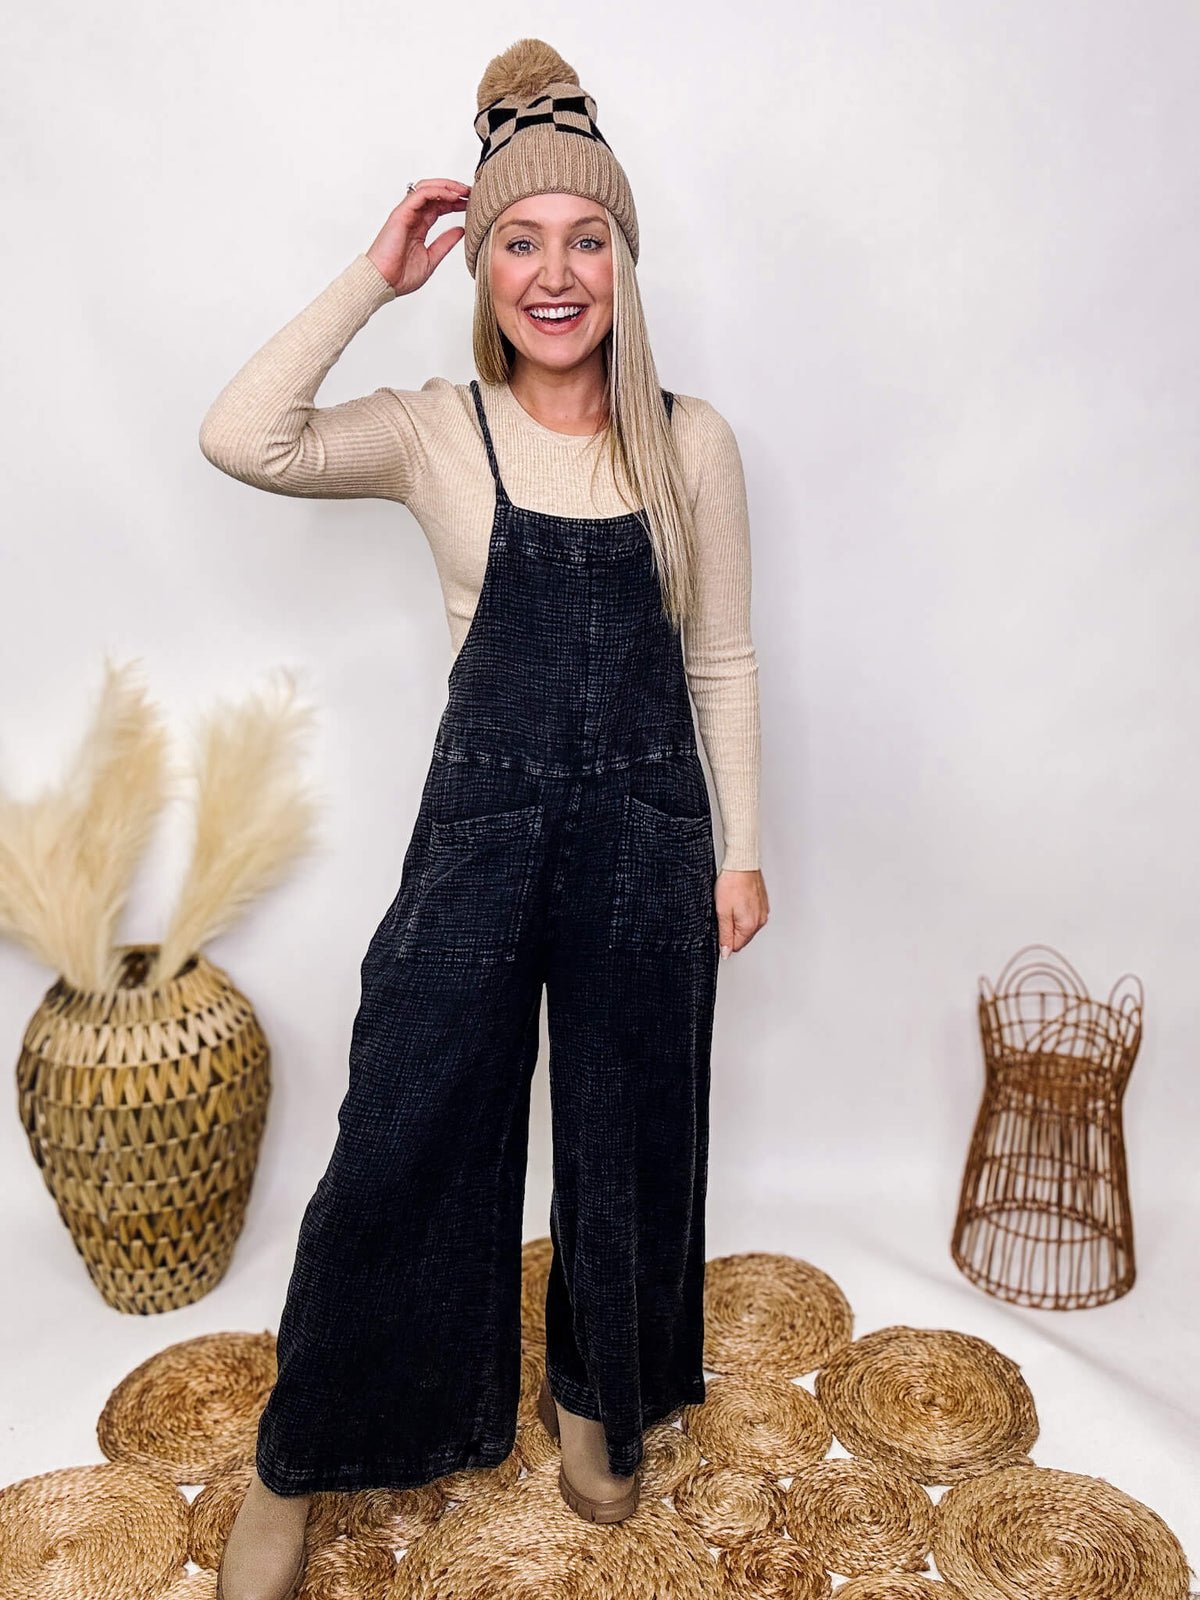 Easel Black Mineral Washed Wide Leg Overall Jumpsuit Adjustable Spaghetti Straps Back Tie Detail Front and Back Pockets Oversized Relaxed Loose Fit 100% Cotton